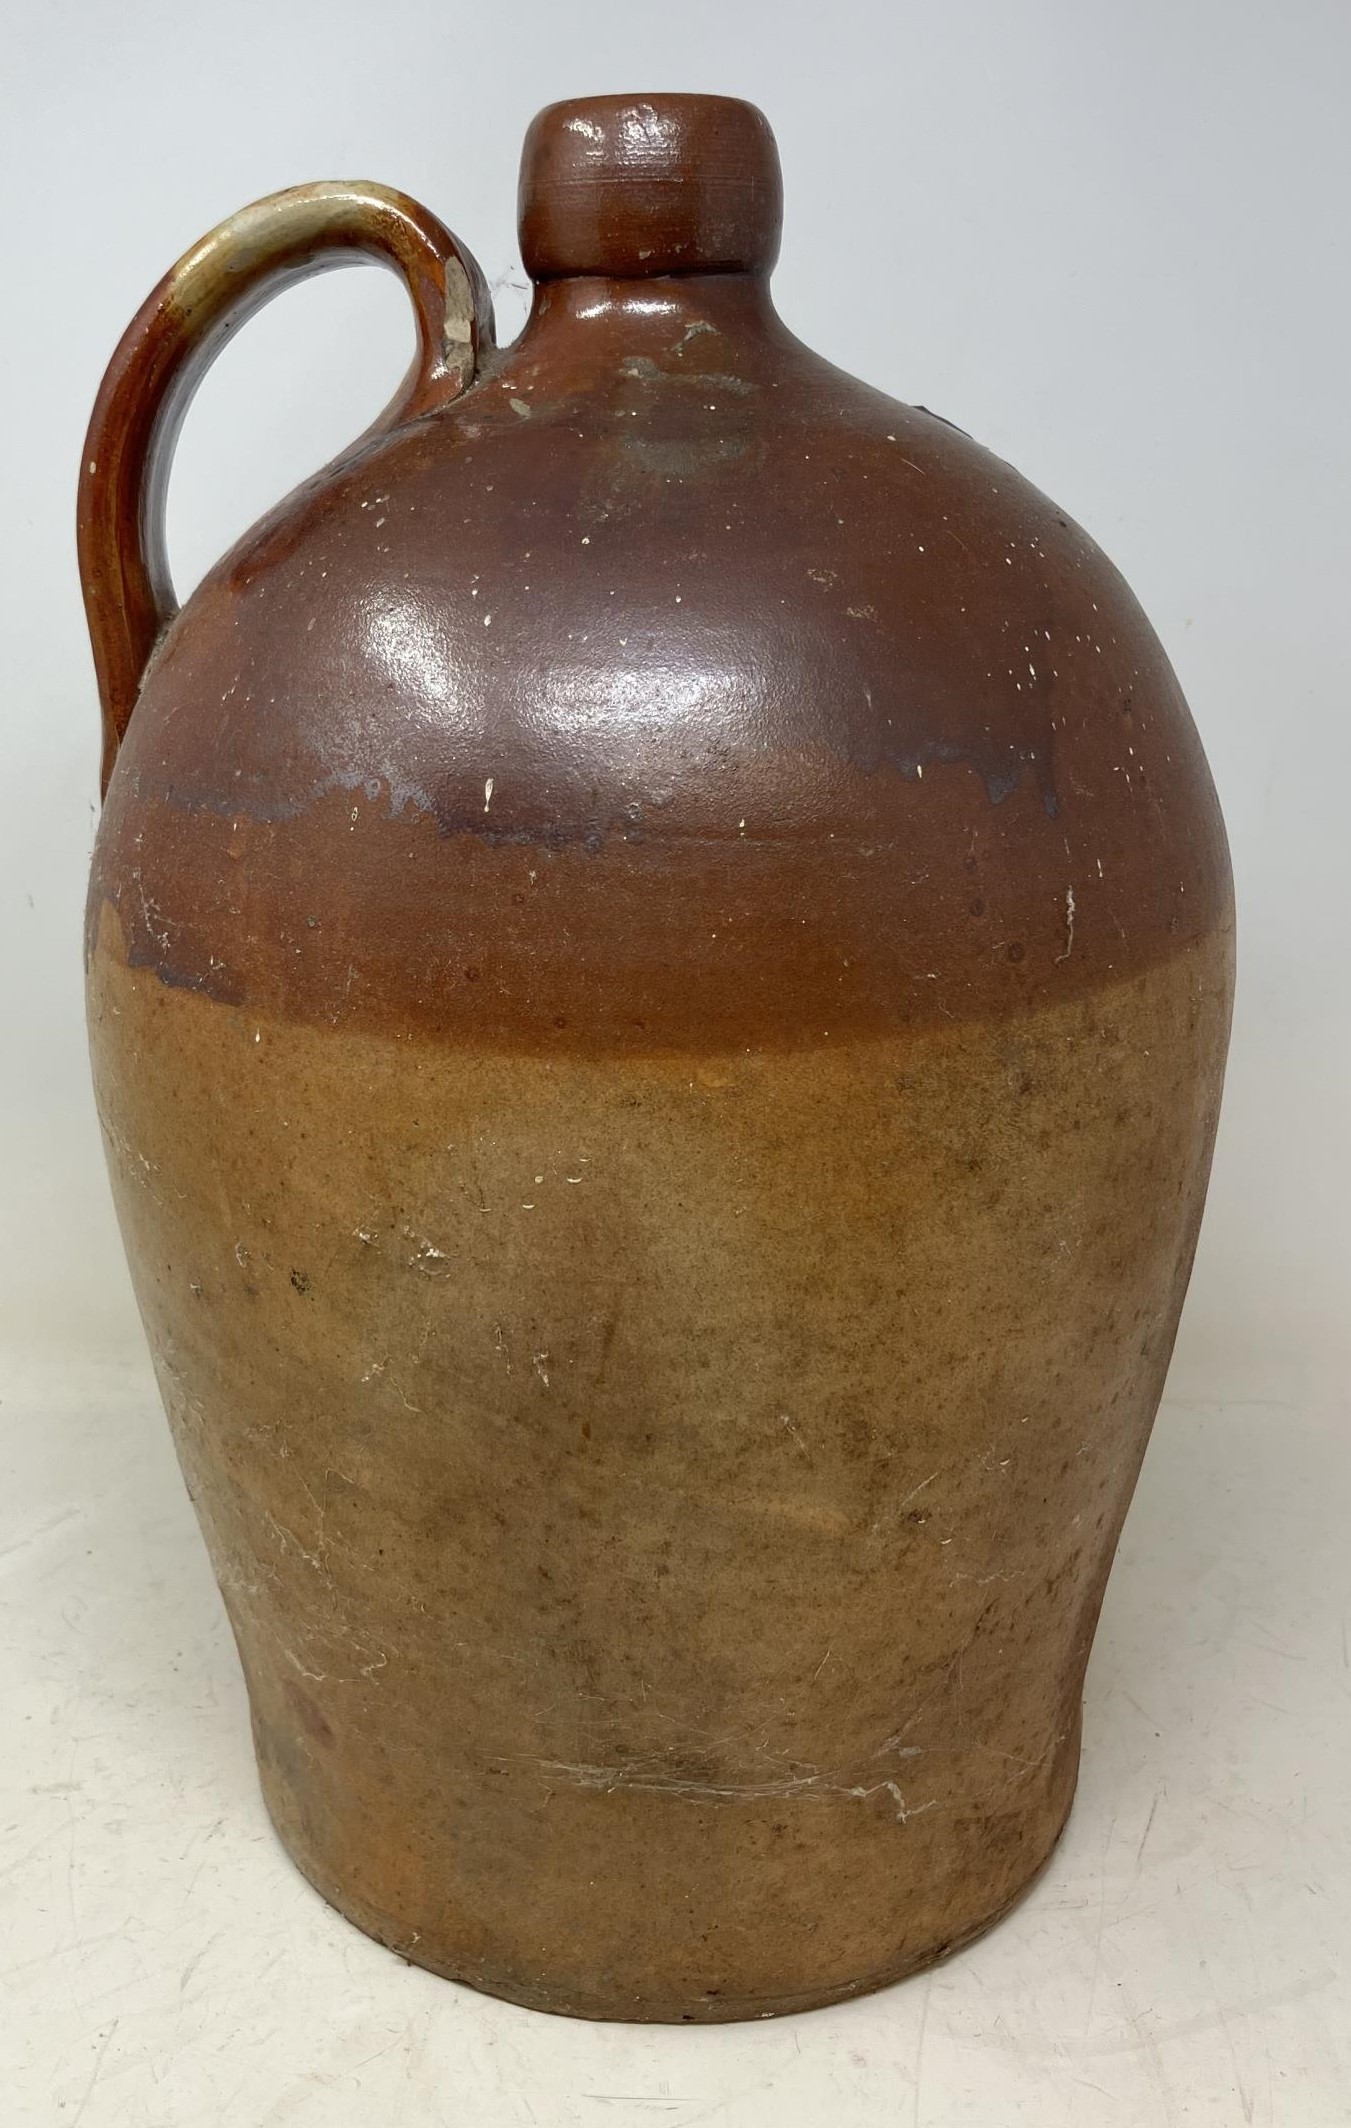 A stoneware flagon, 43 cm high, a large glass bottle, a suitcase filled with silver plated glass